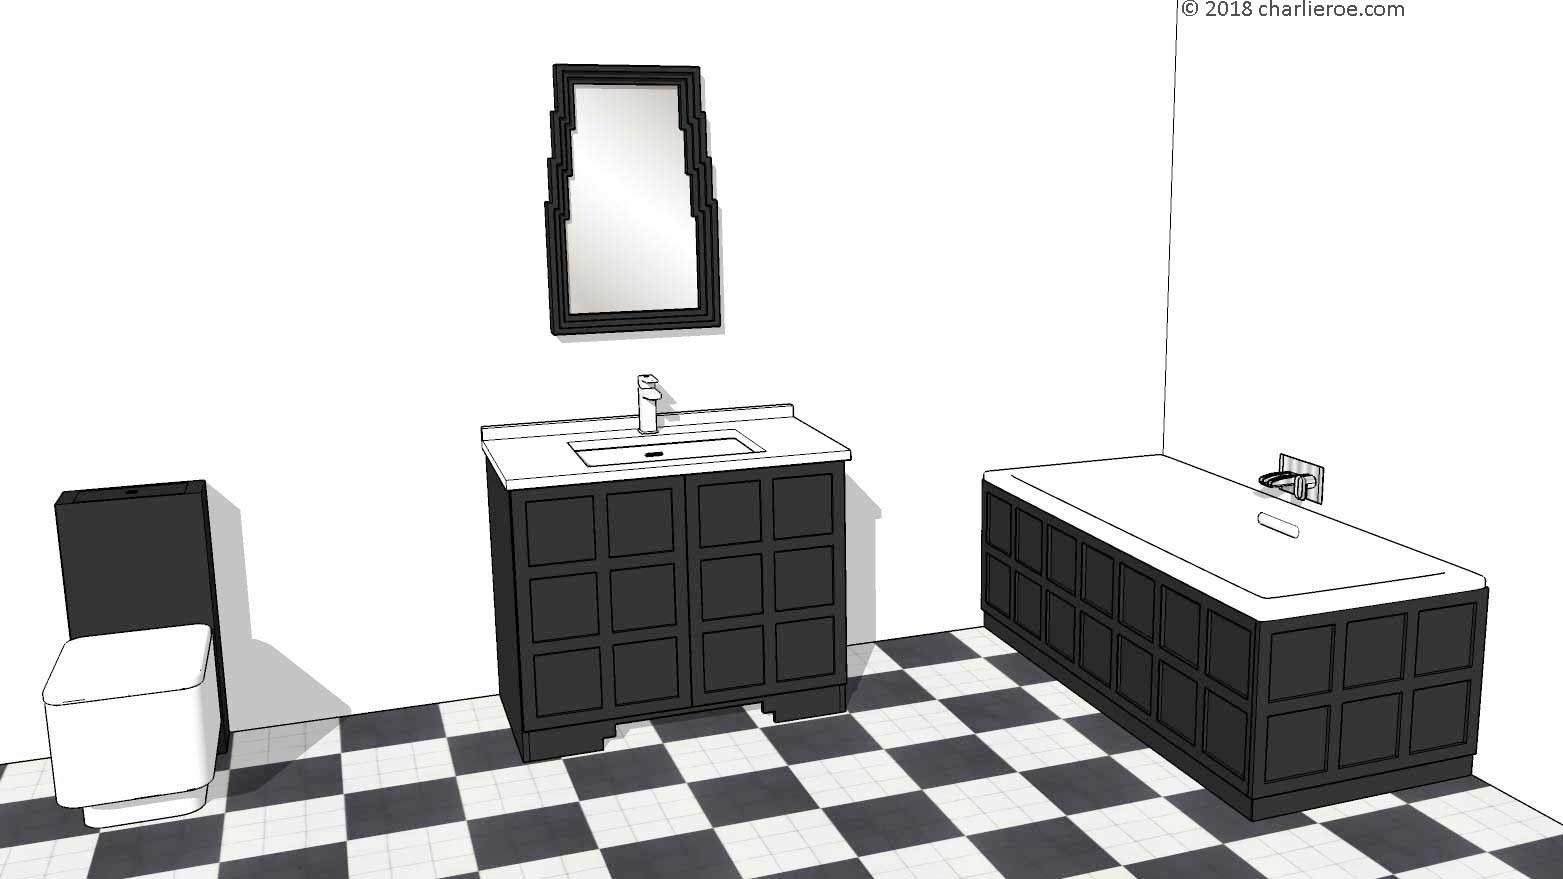 CR Mackintosh Derngate style black painted bathroom  2 door vanity unit with painted Cubist patterns